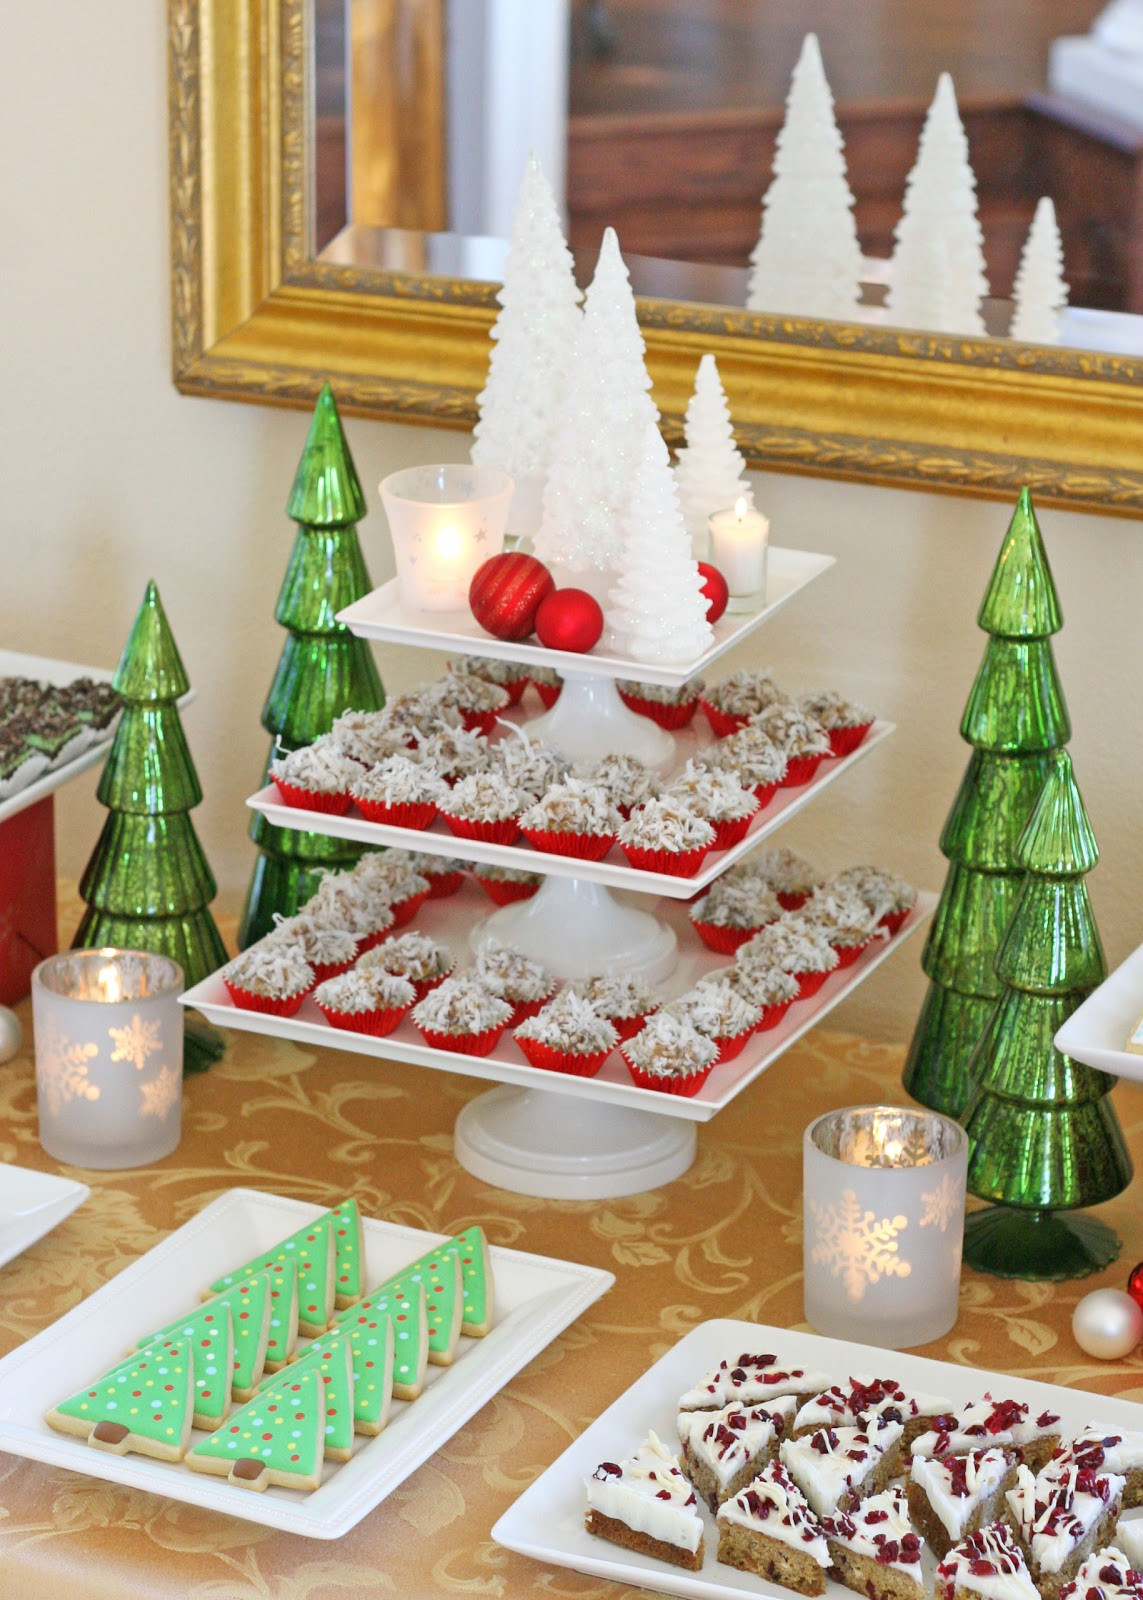 Classic Christmas Desserts
 Classic Holiday Dessert Table Glorious Treats